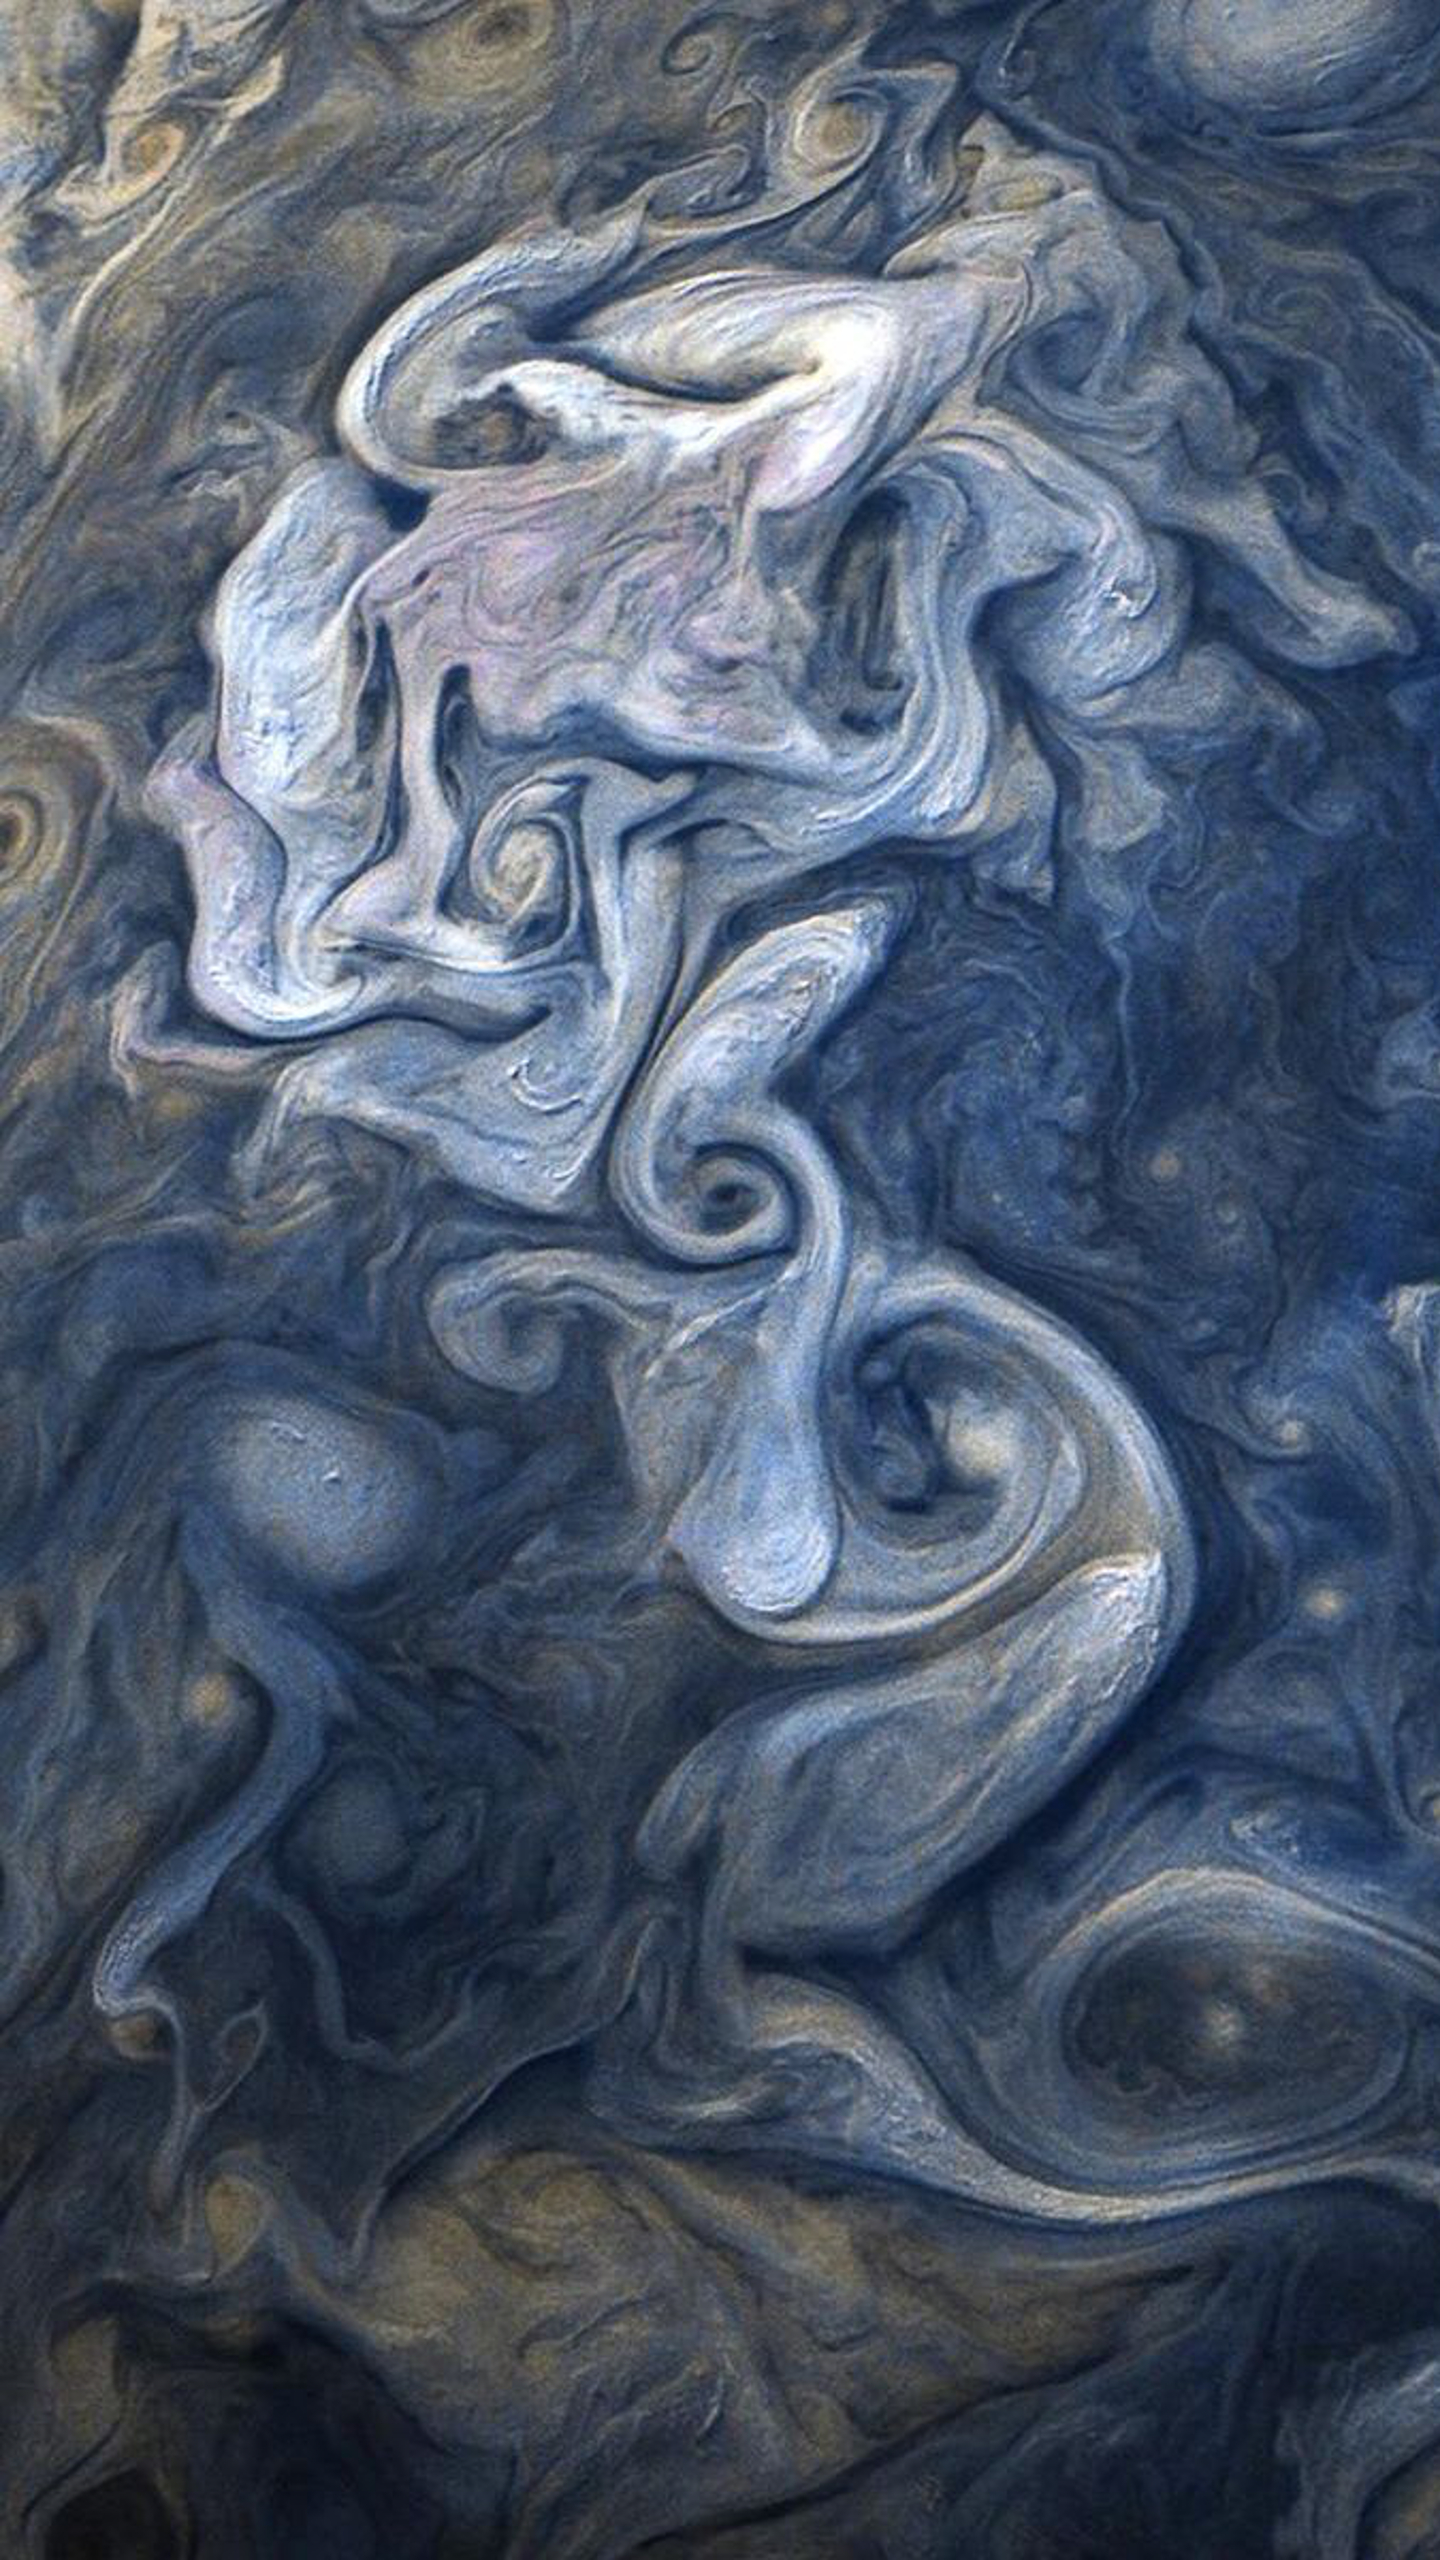 10 Things for Jan. 8: Images for Your Computer or Phone Wallpaper – NASA  Solar System Exploration